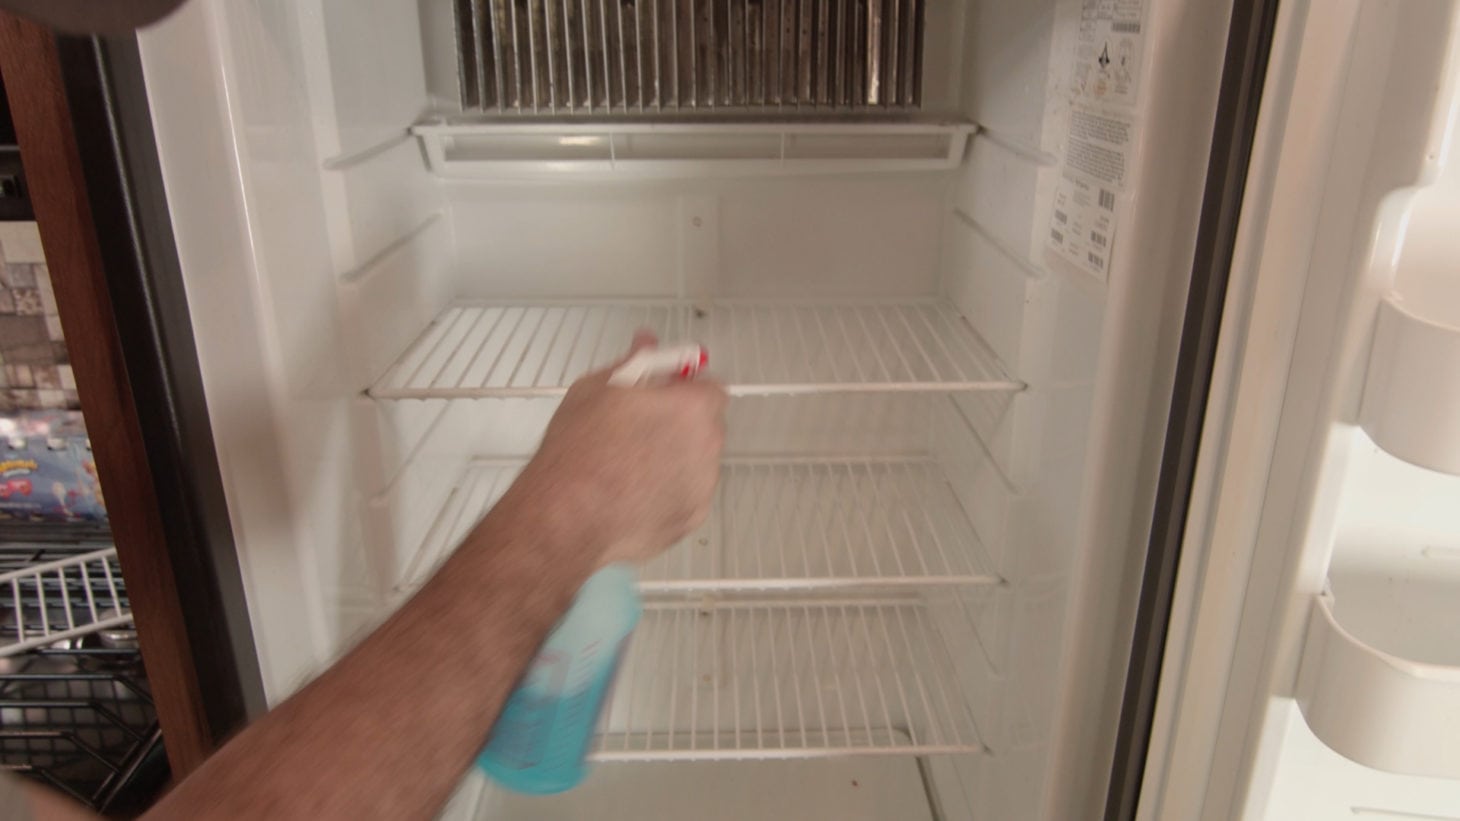 Spraying cleaning product in an RV fridge for cleaning